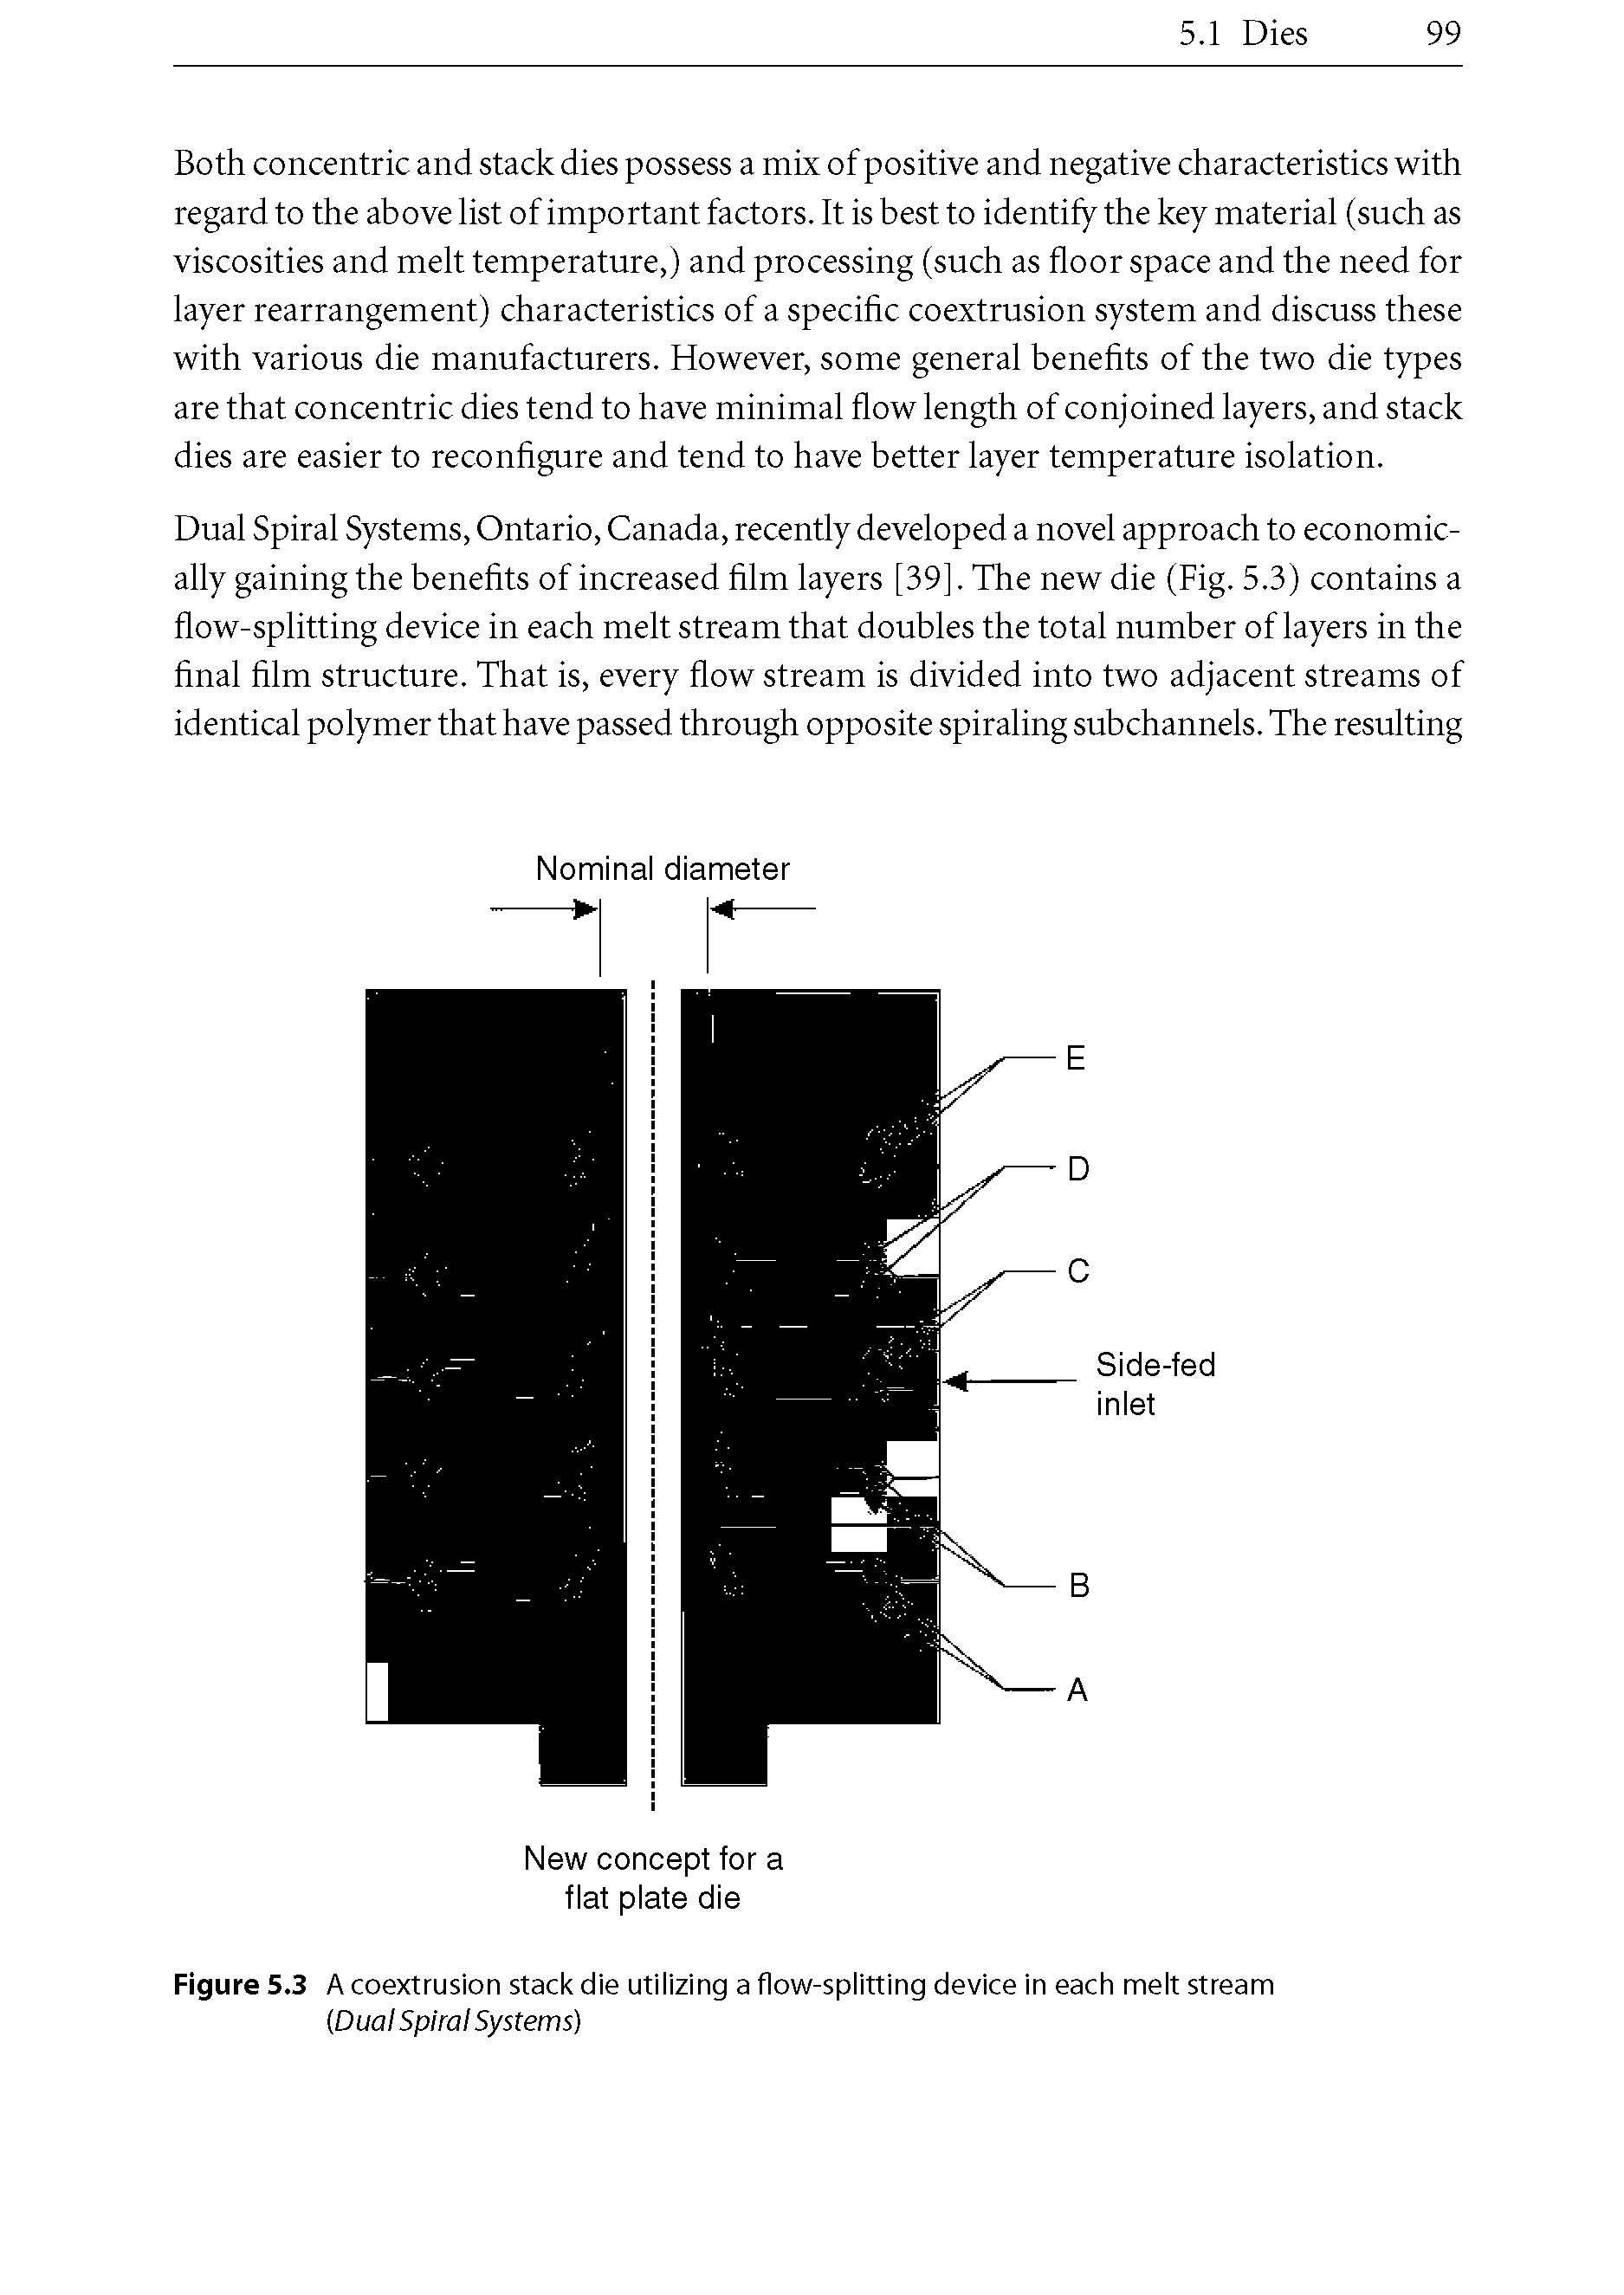 Figure 5.3 A coextrusion stack die utilizing a flow-splitting device in each melt stream Dual Spiral Systems)...